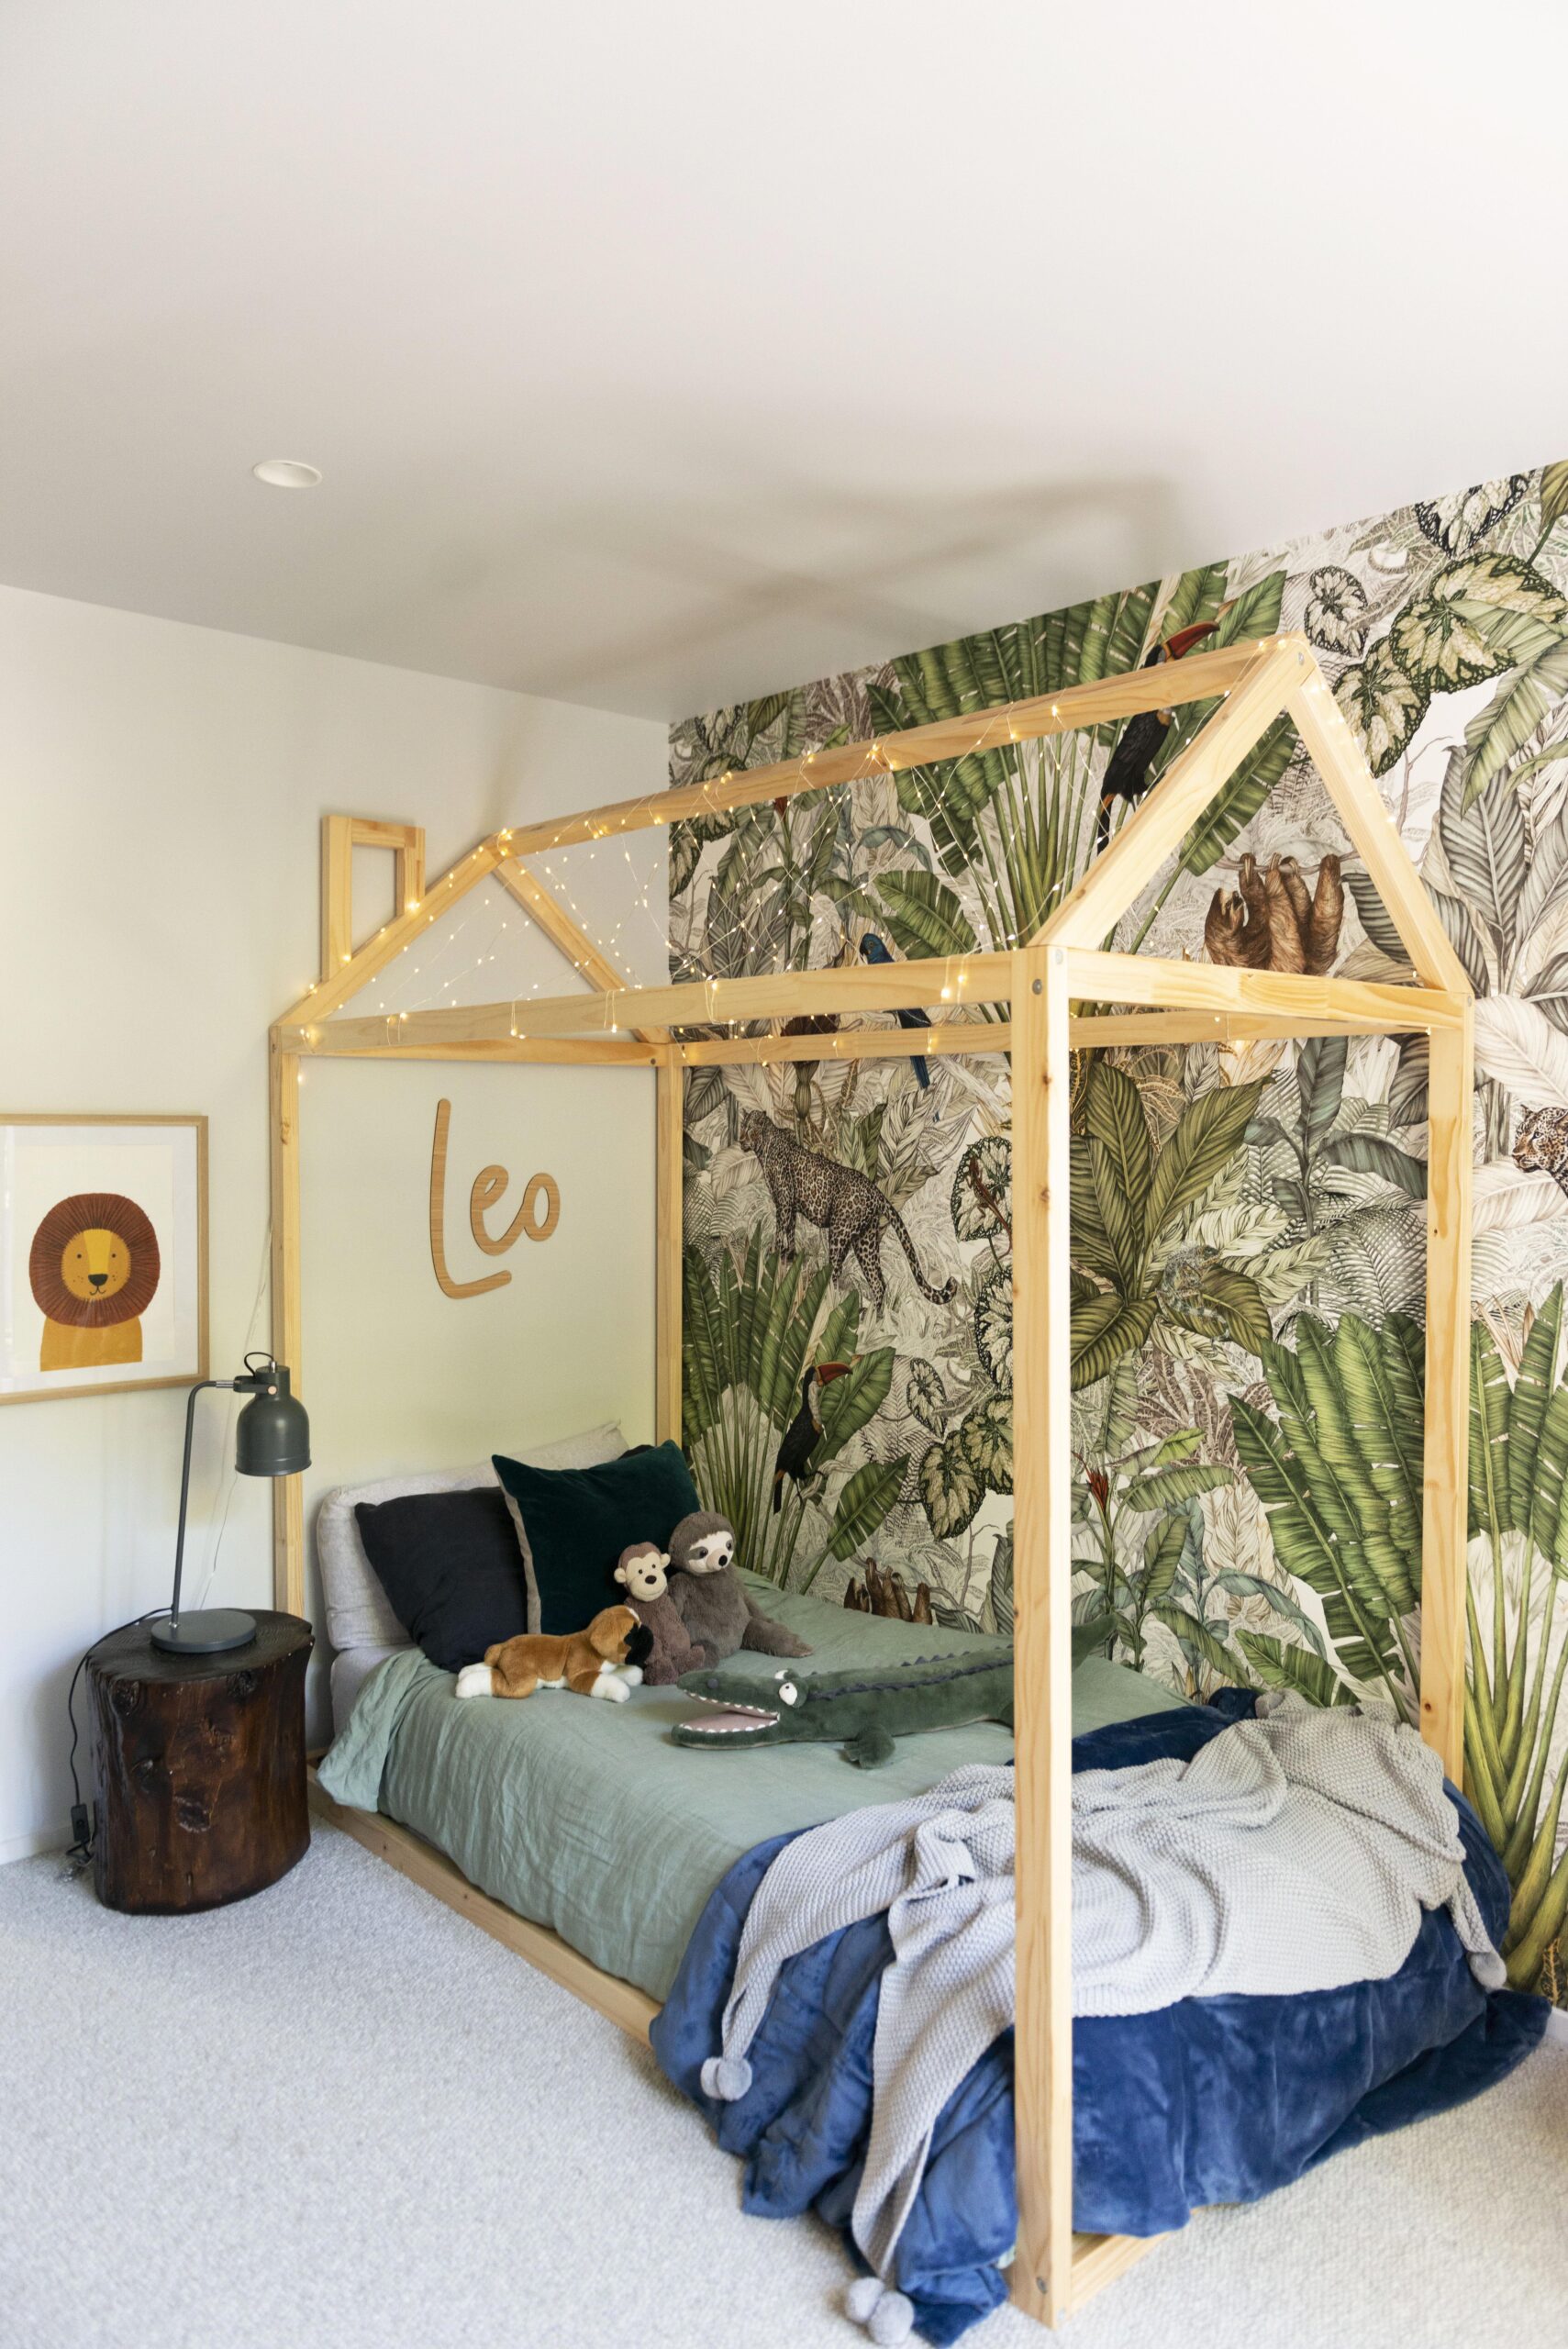 A Mocka cabin bed on the floor jungle wallpaper, and a large Leo sign is above the bed